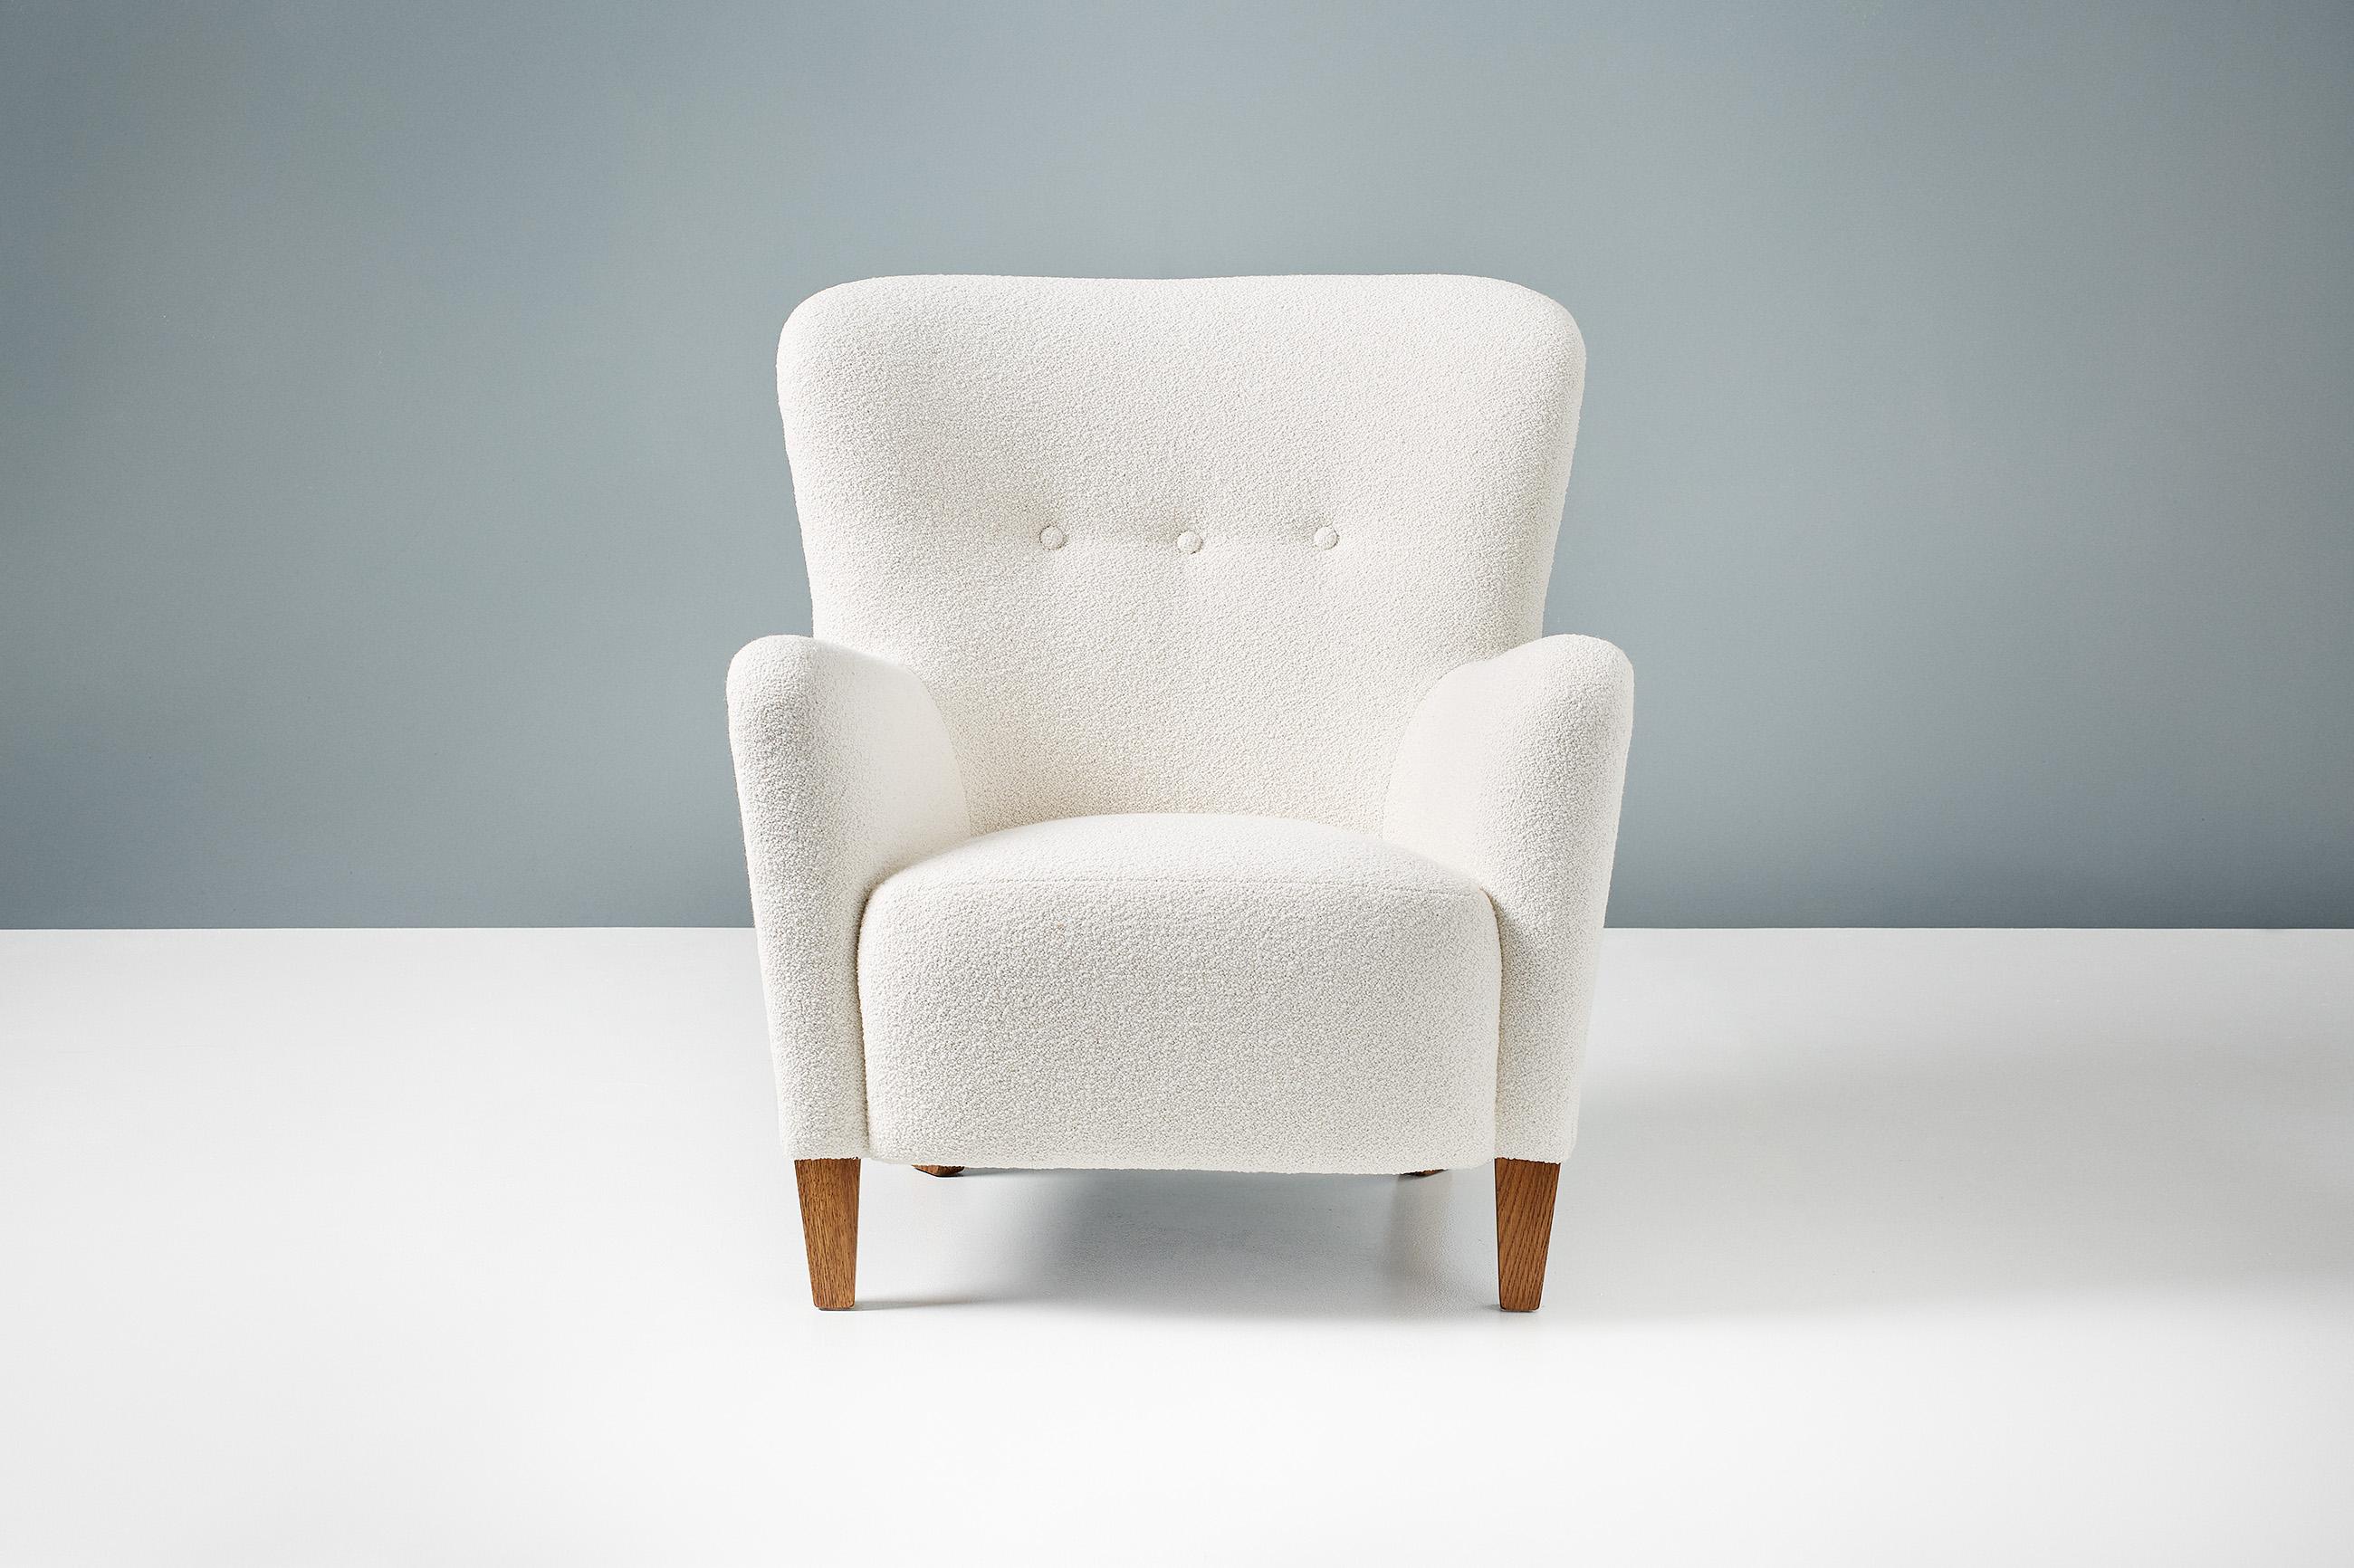 Dagmar Design - Ryo lounge chair

The Ryo lounge chair is from our custom-made upholstered range. This piece has been developed and hand-made at our workshops in London using the highest quality materials. The frame is constructed from solid beech